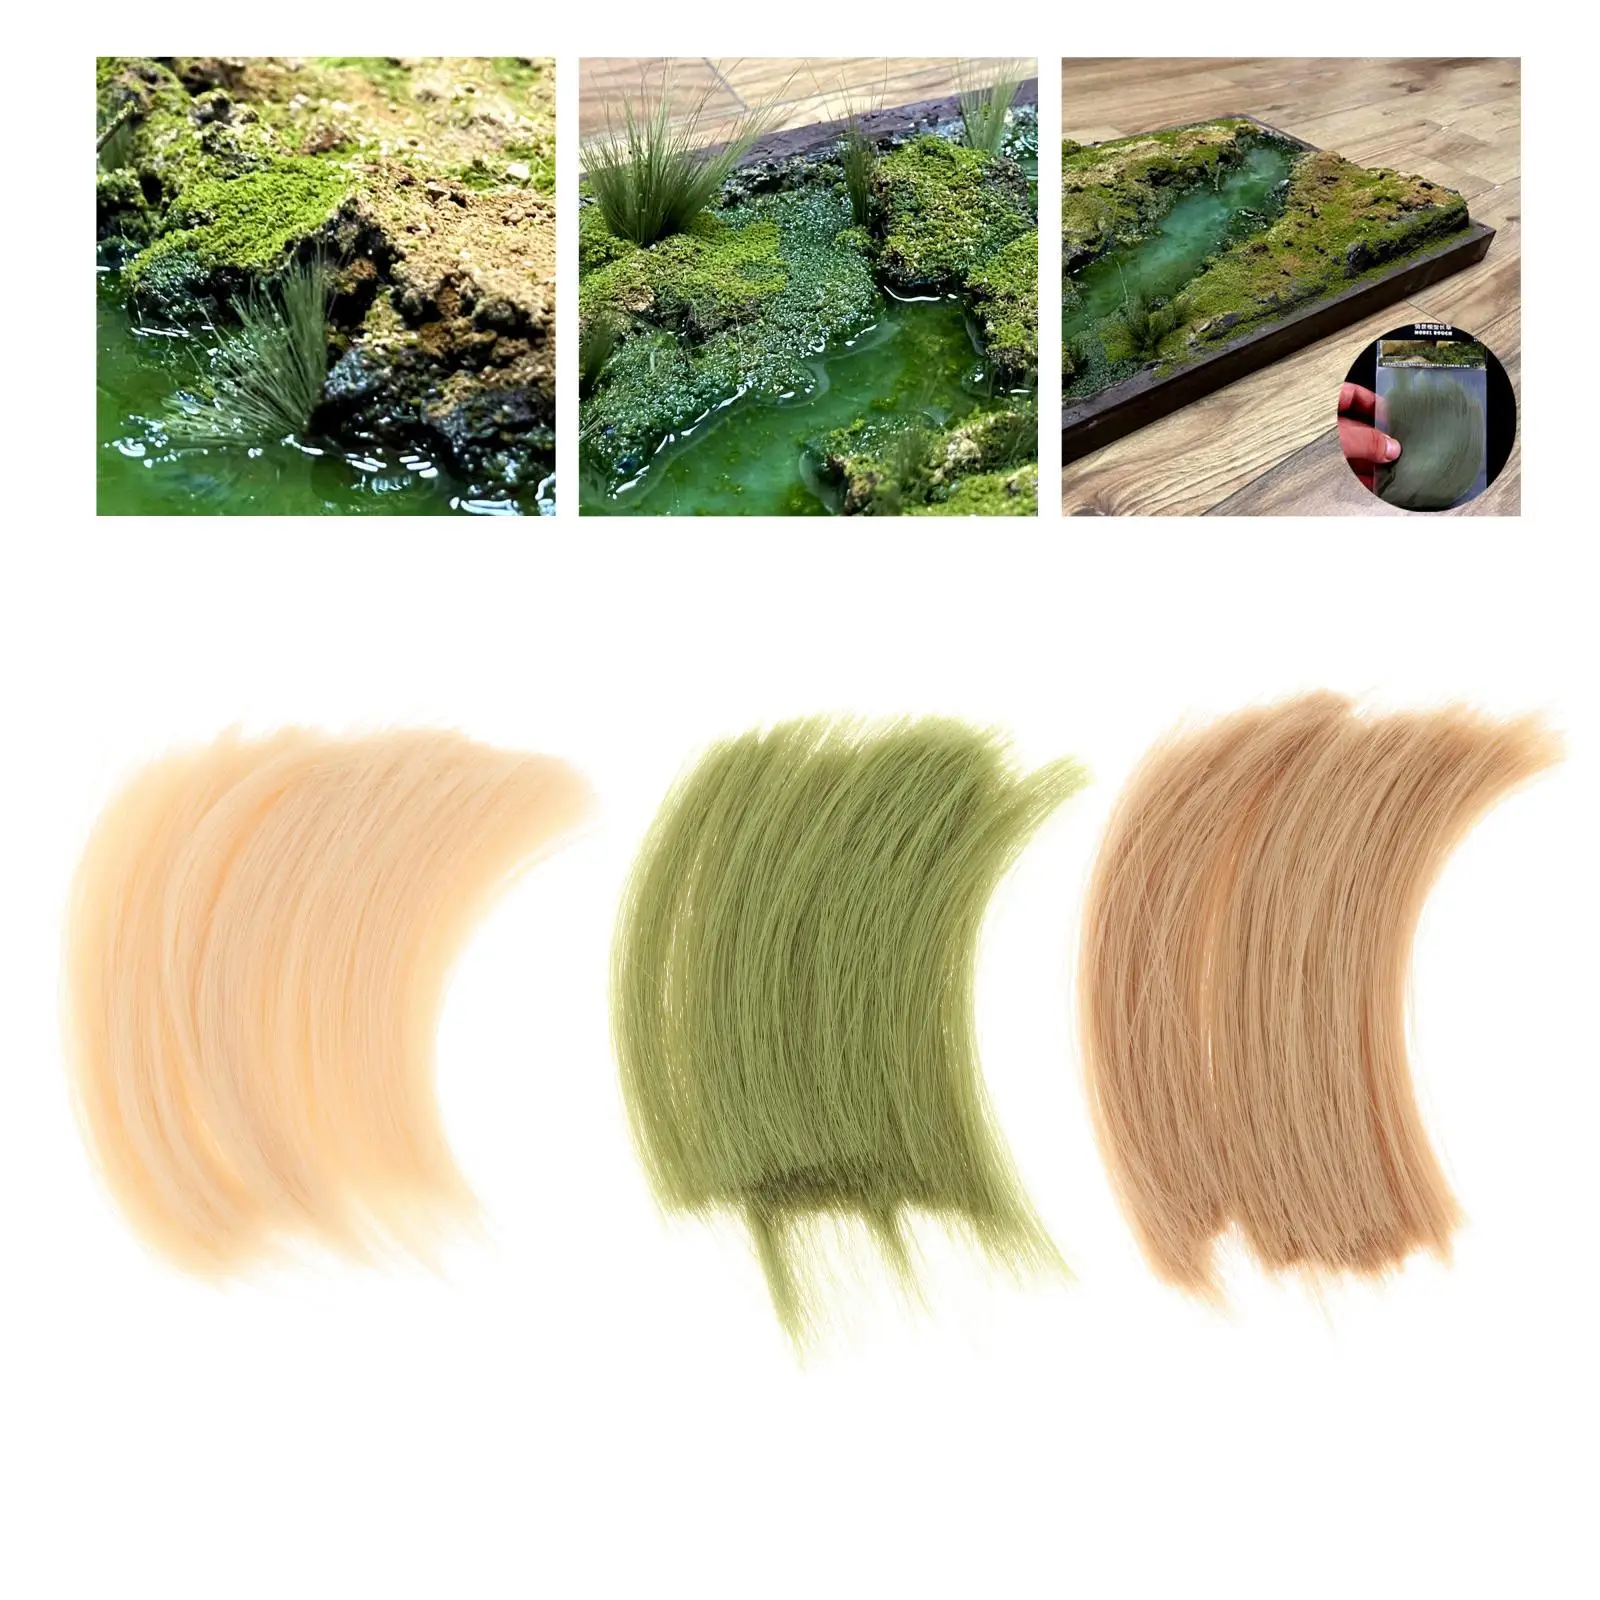 Resin Long Grass Model Making Material Toys Layout Supplies for Sand Table